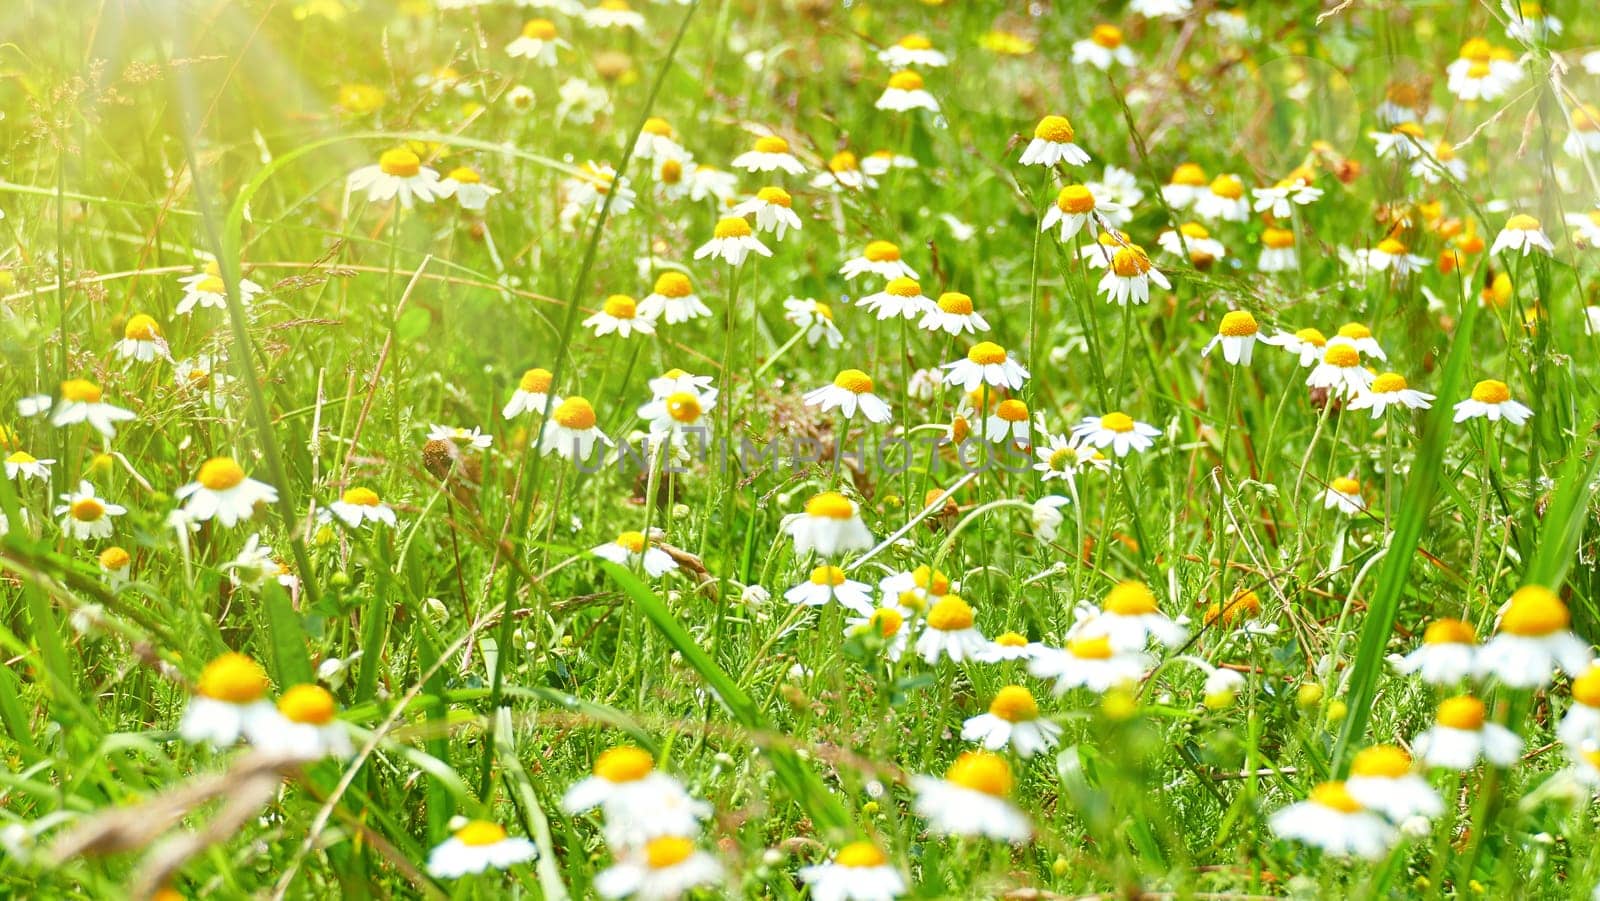 Field of daisies in spring.